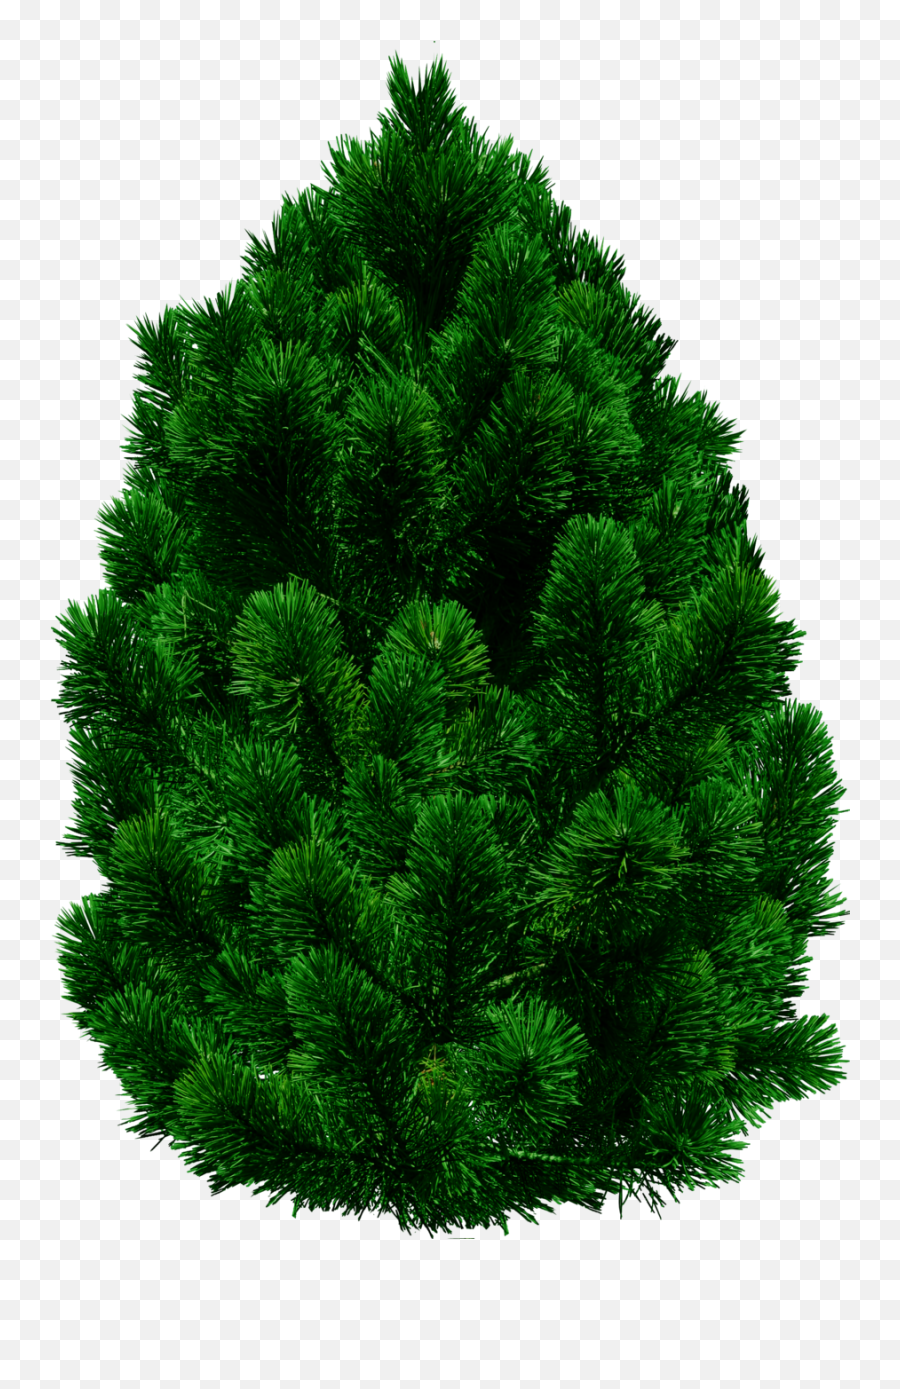 40 Tree Png Images Are Free To Download - Tree Image In Png,Tree Elevation Png